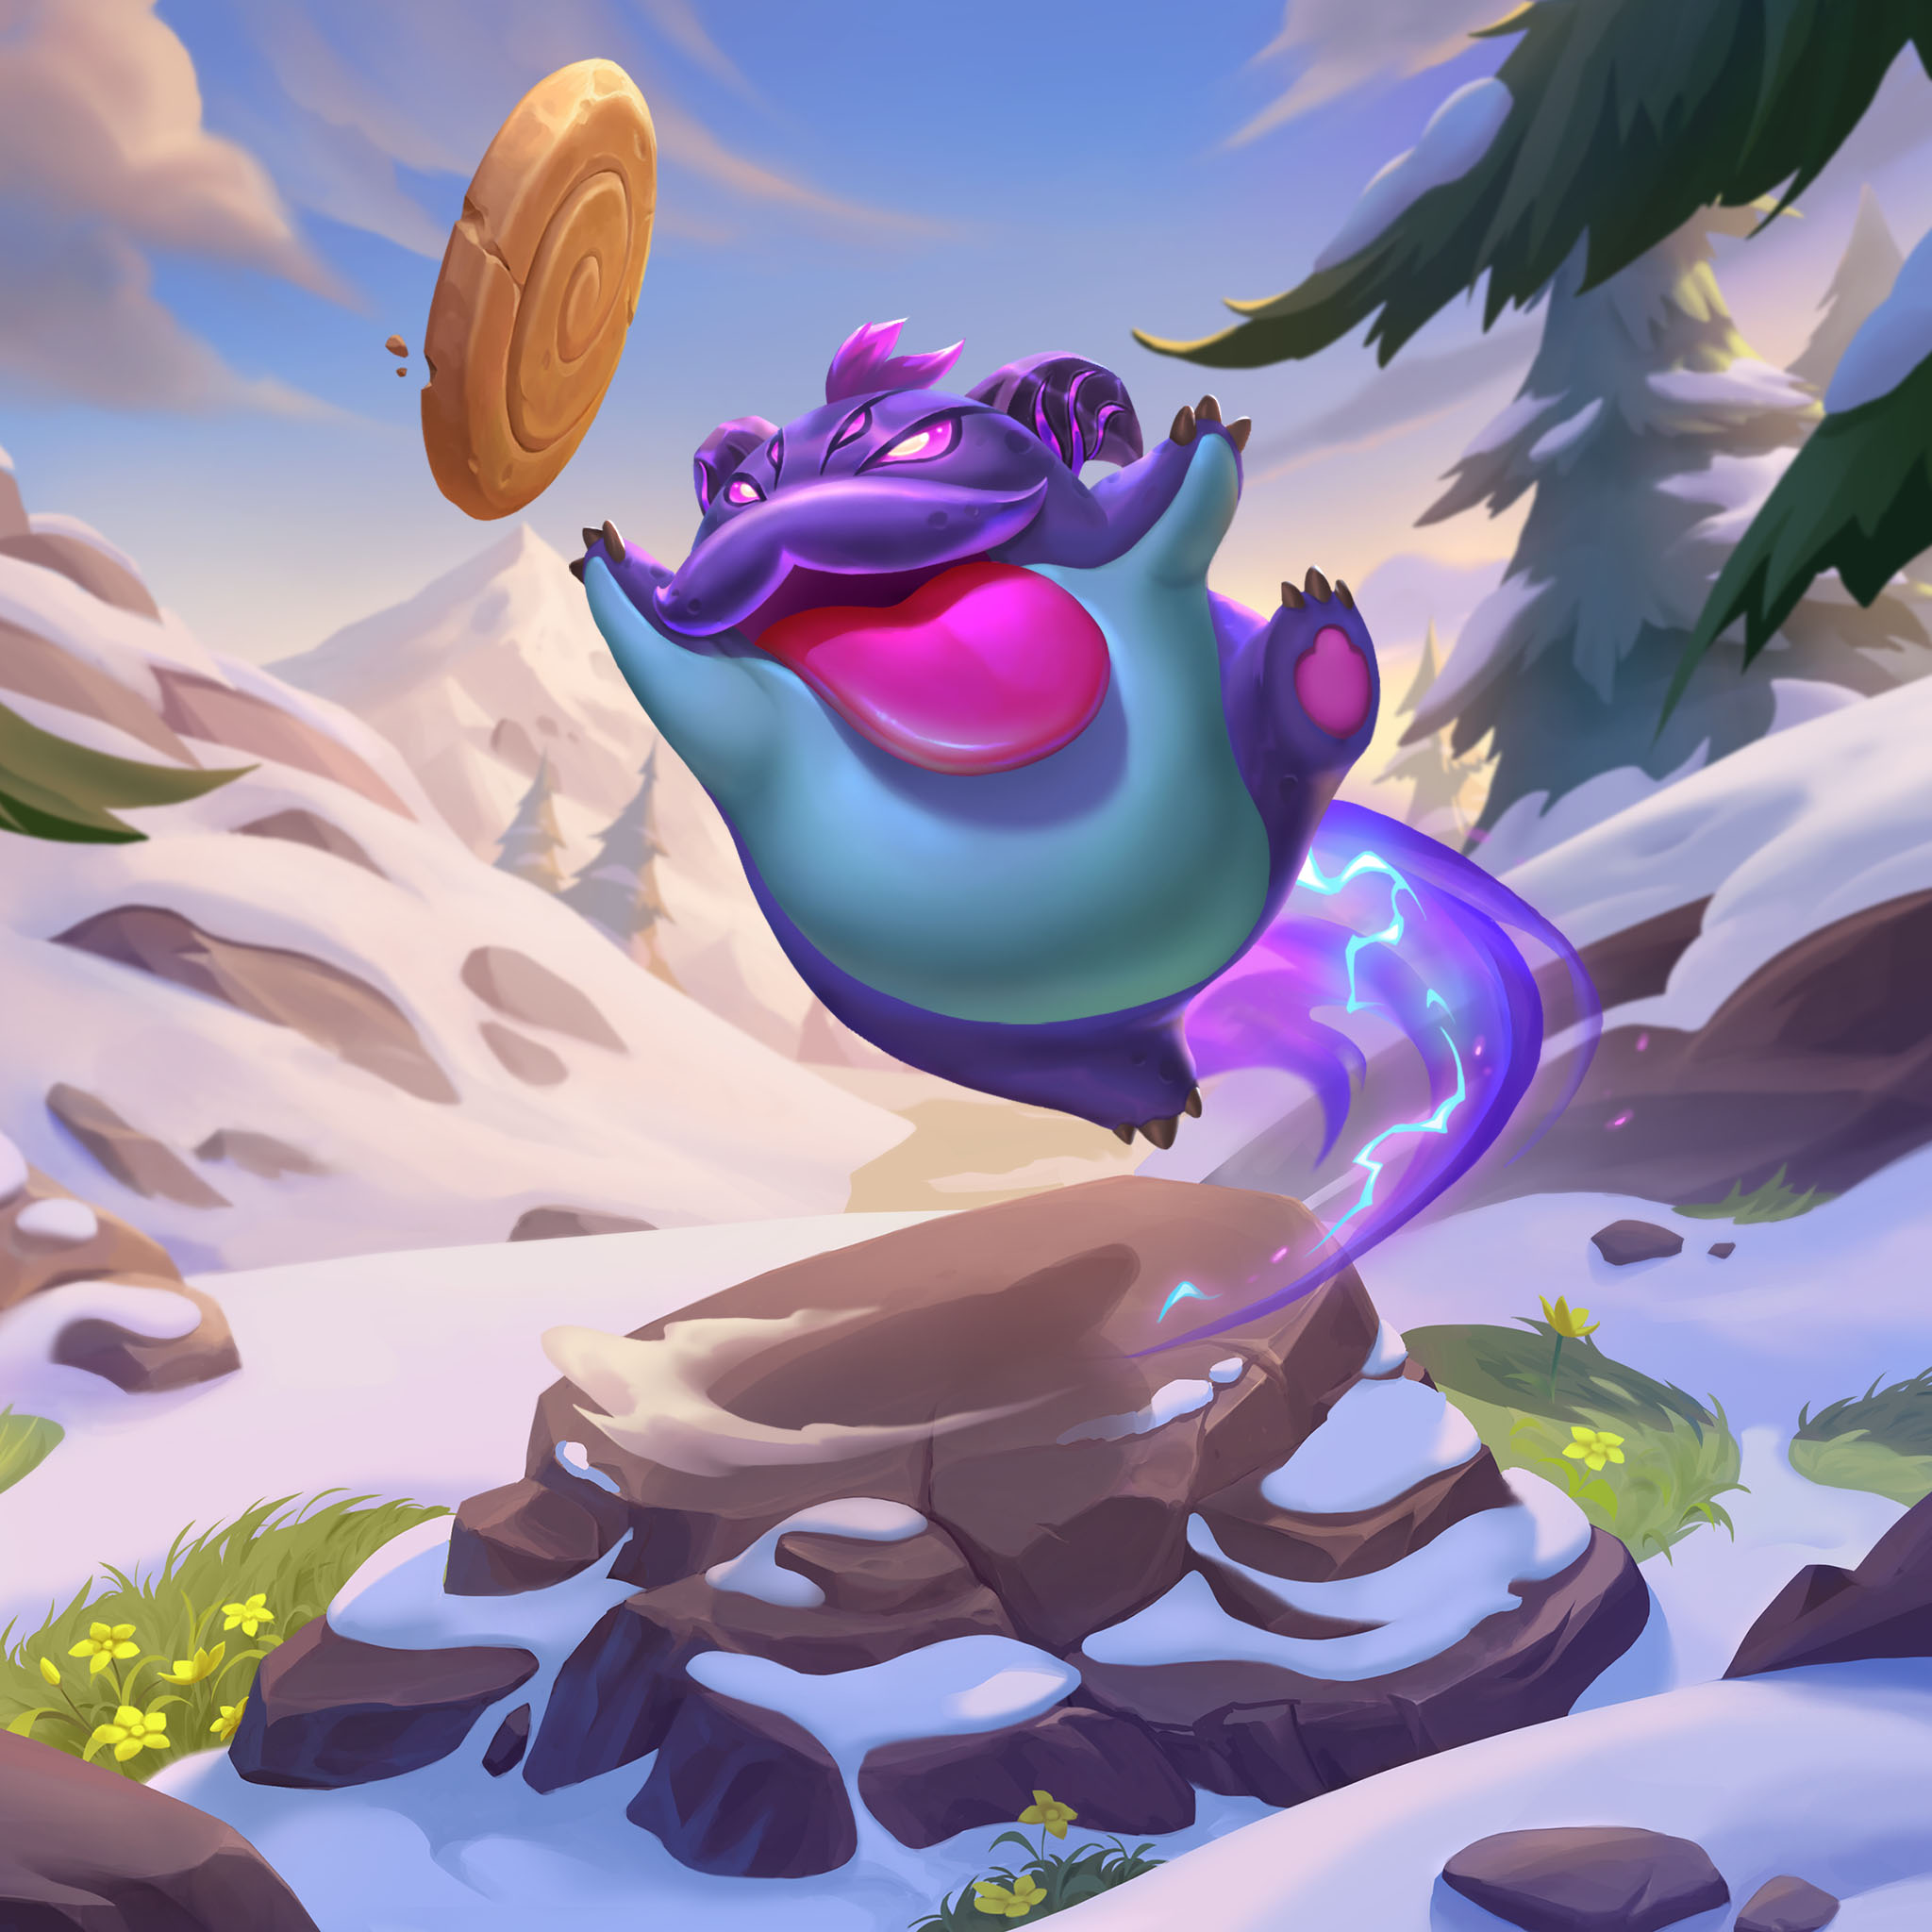 Nobody messes with Choncc's prize-winning Honeyfruit. Not even Sion. Old  friends and new worlds converge in TFT: Runeterra Reforged. Play…